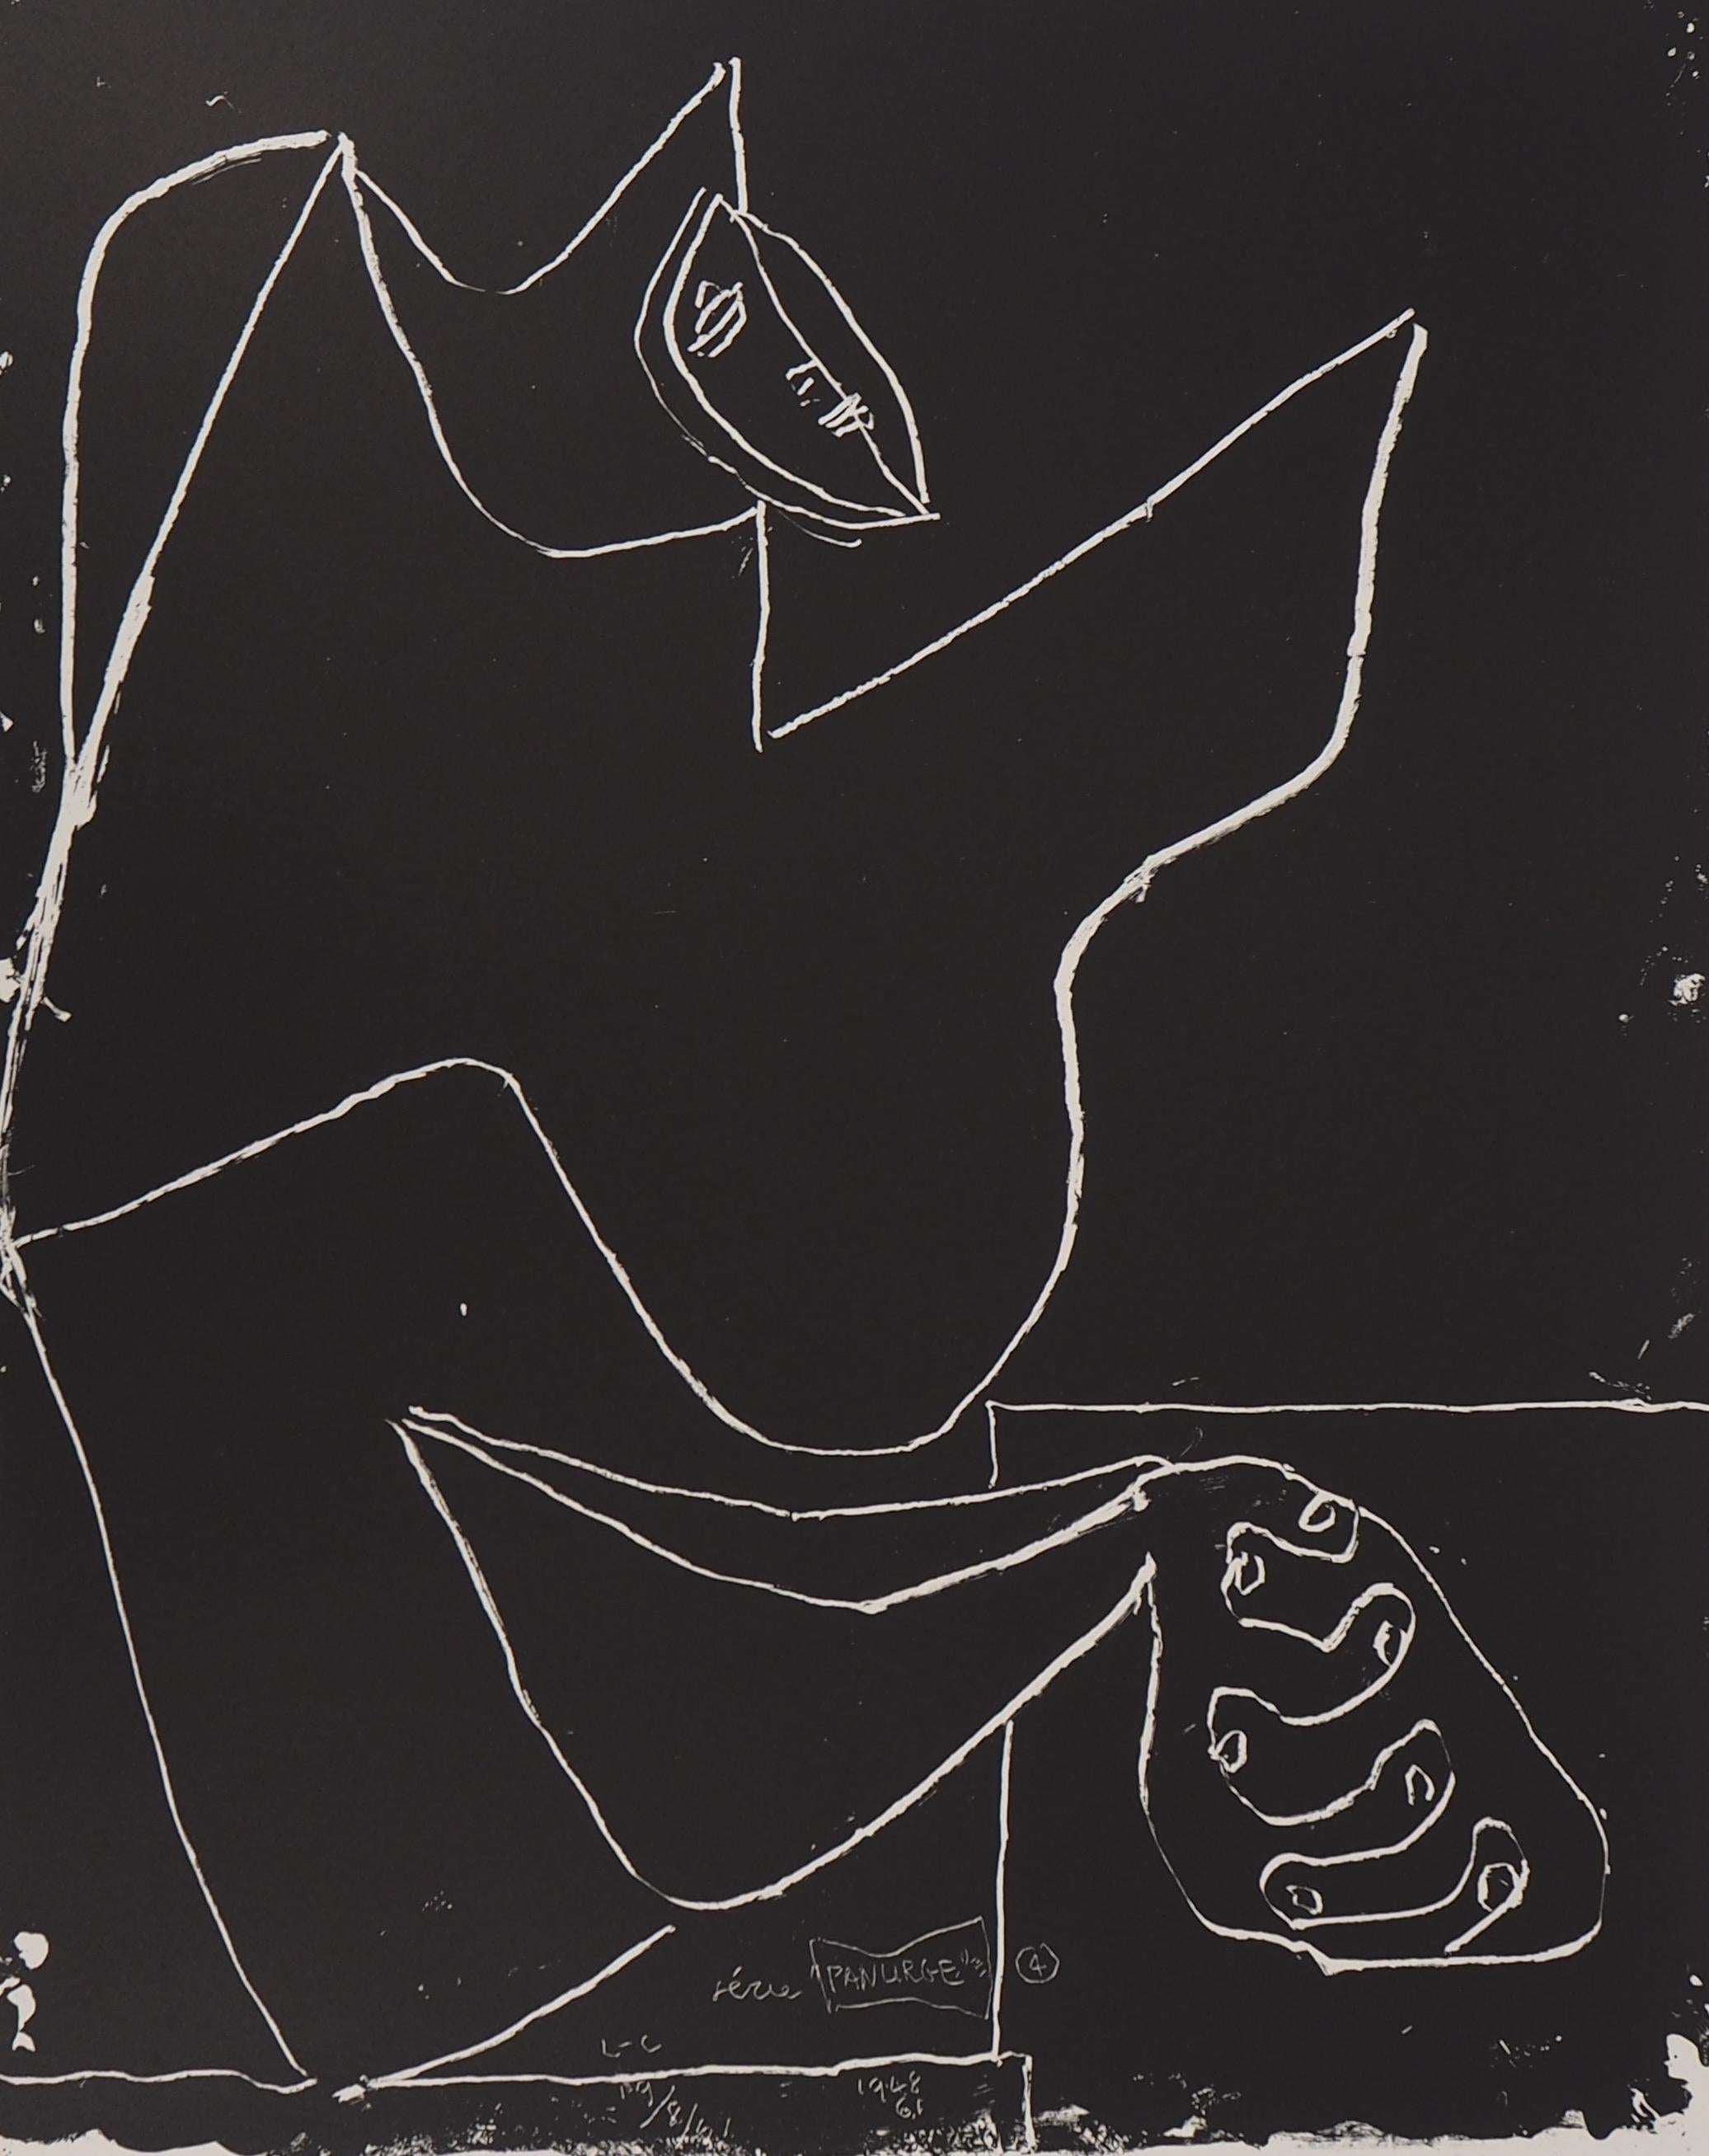 Hands and Dancer - Original Lithograph (Mourlot) - Modern Print by Le Corbusier